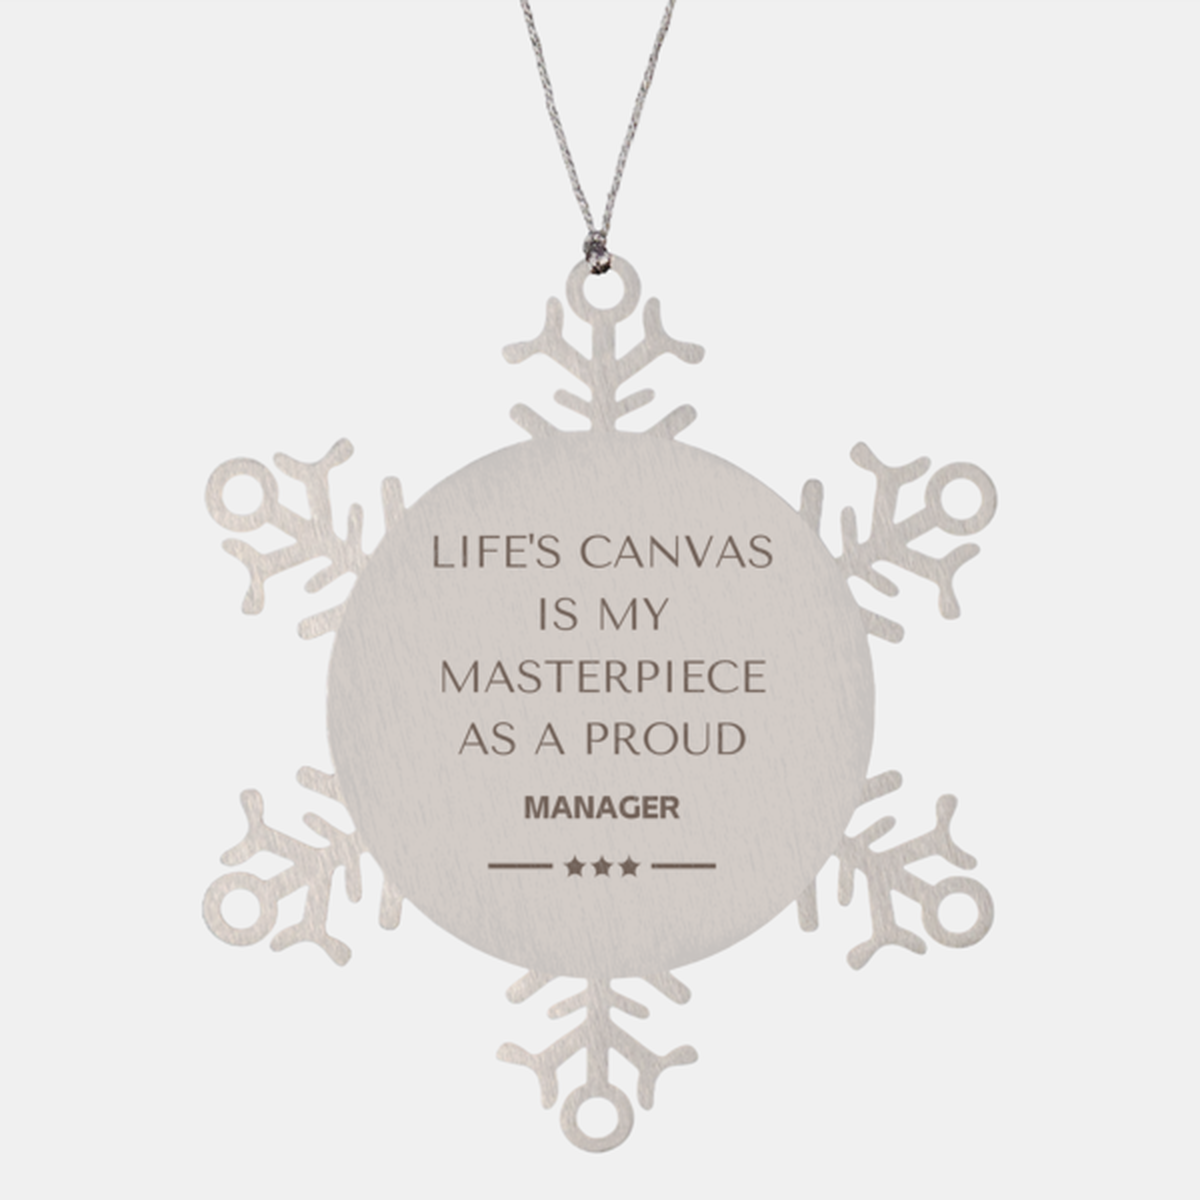 Proud Manager Gifts, Life's canvas is my masterpiece, Epic Birthday Christmas Unique Snowflake Ornament For Manager, Coworkers, Men, Women, Friends